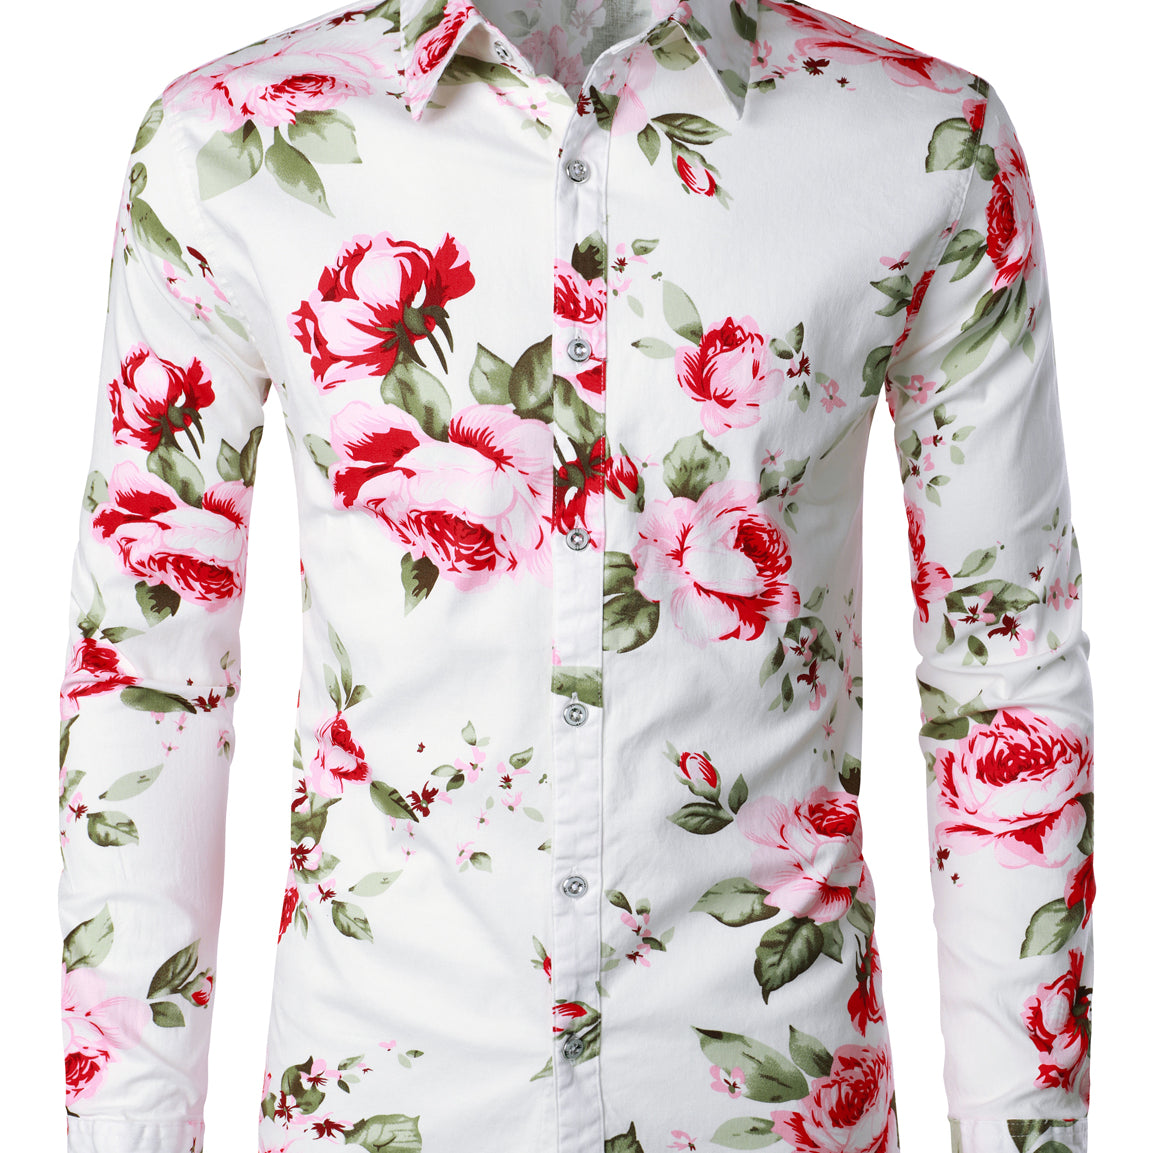 Men's Floral Print White Casual Tops Button Up Long Sleeve Dress Shirt